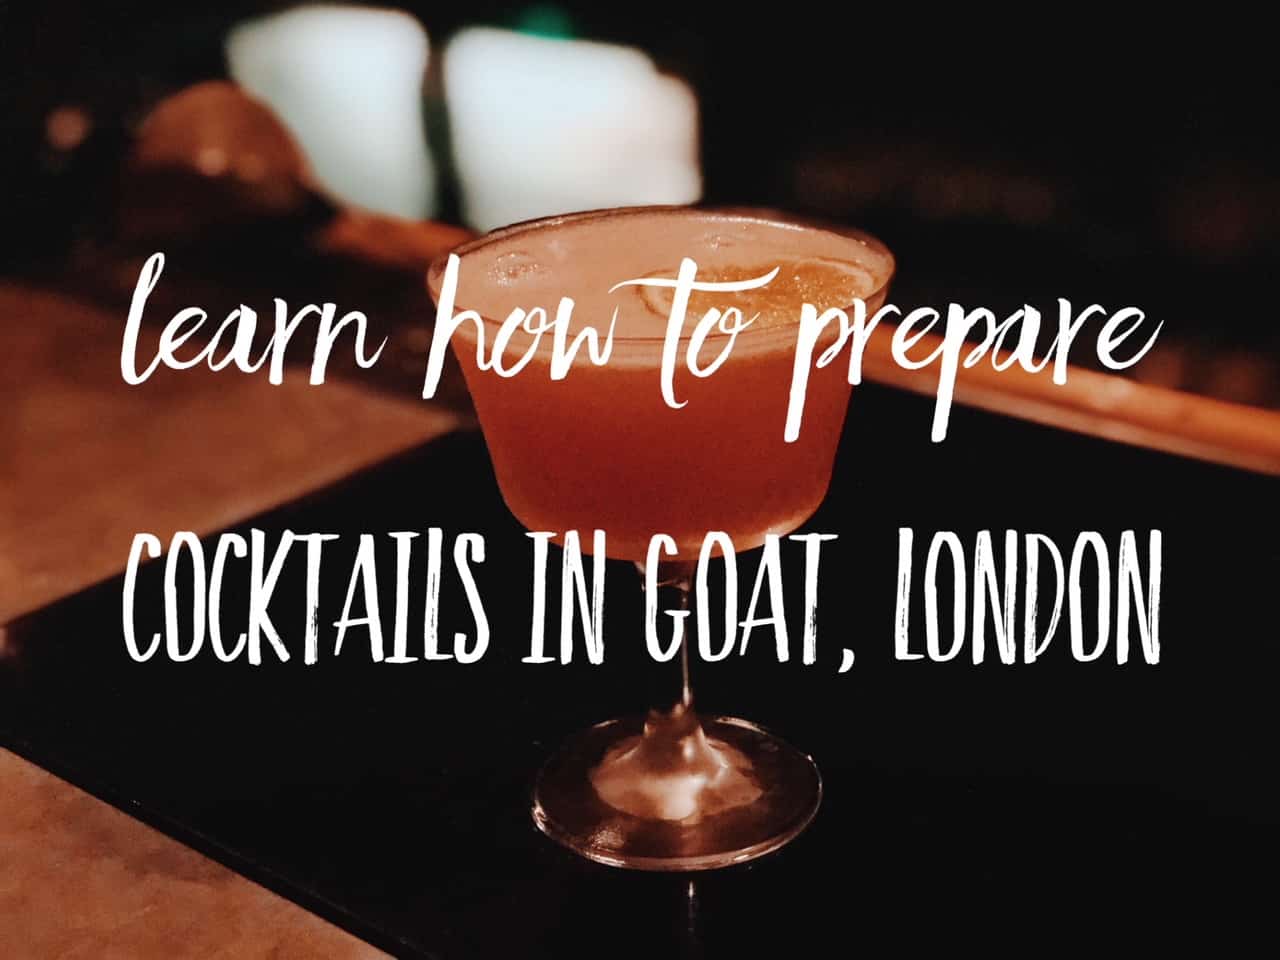 Hemingway-inspired cocktail-making class in Goat, London